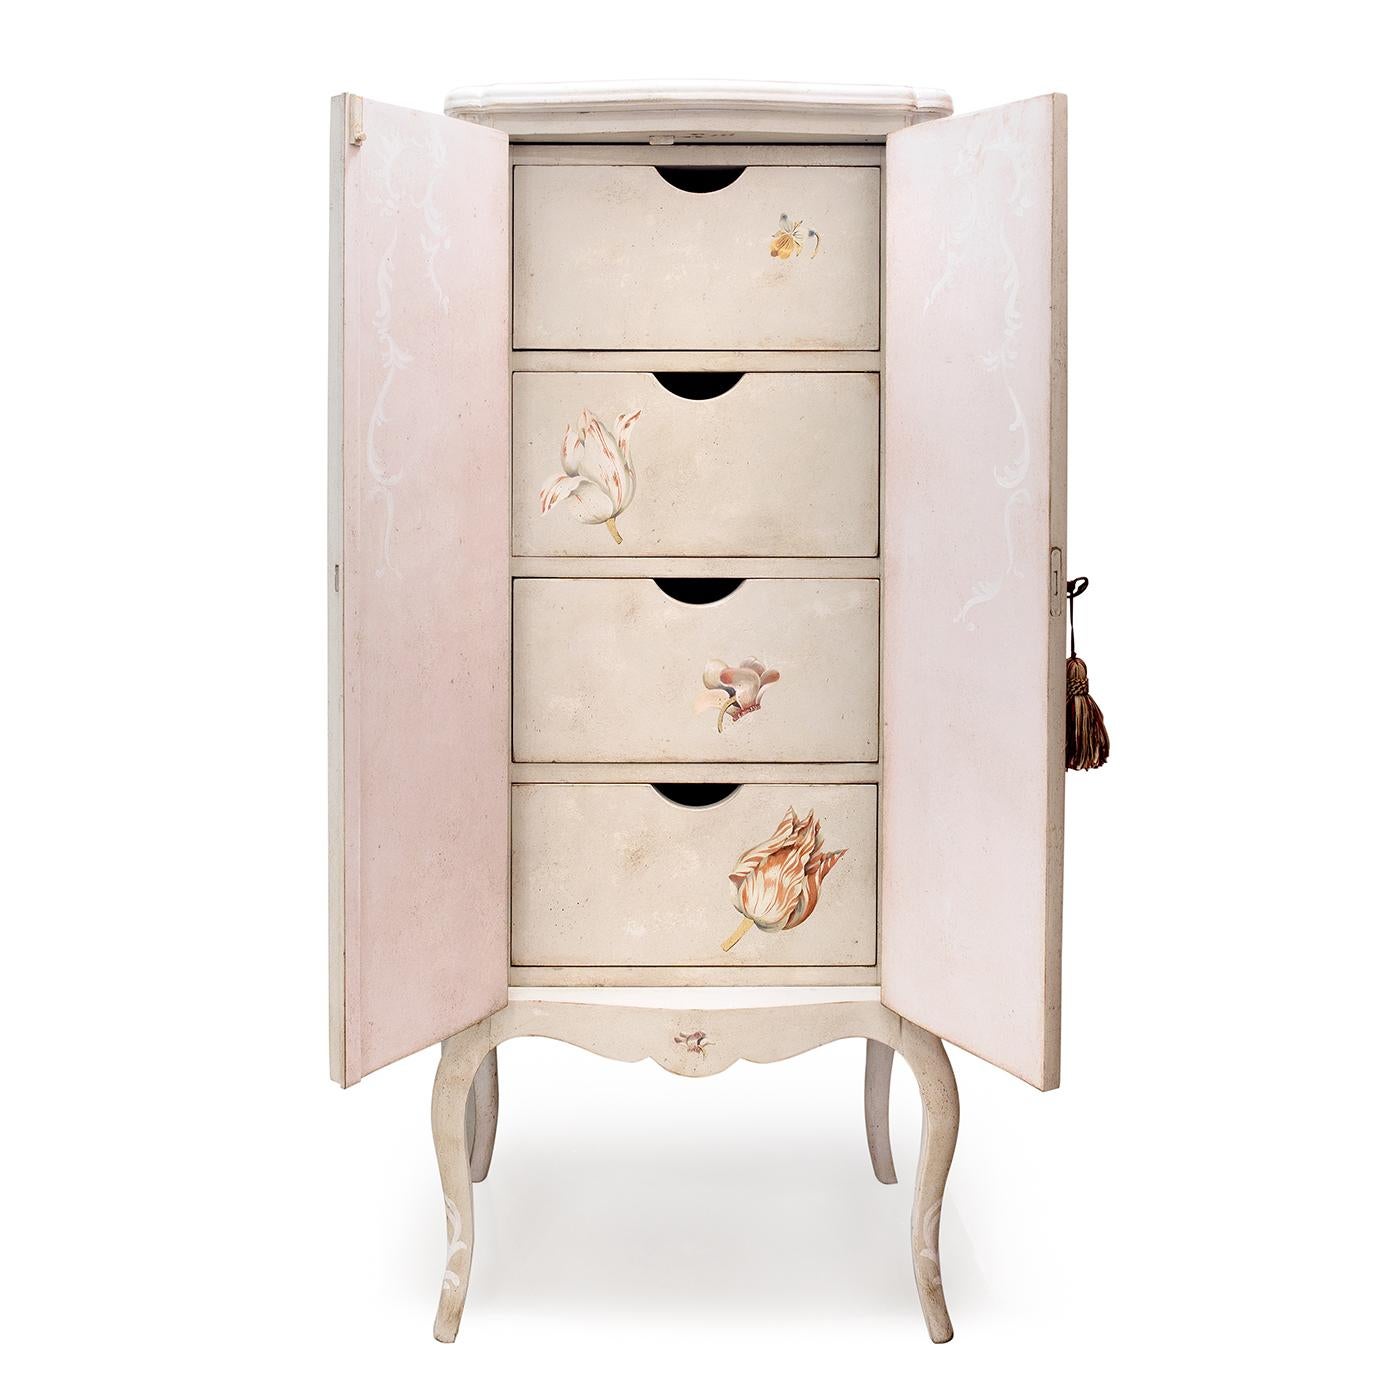 Entirely hand crafted and beautifully decorated using Venetian style techniques, the custom made Tiepolo Tall Cabinet is exceptionally stylish and charming in design. The colors and decorations can be applied according to the customer's requests in